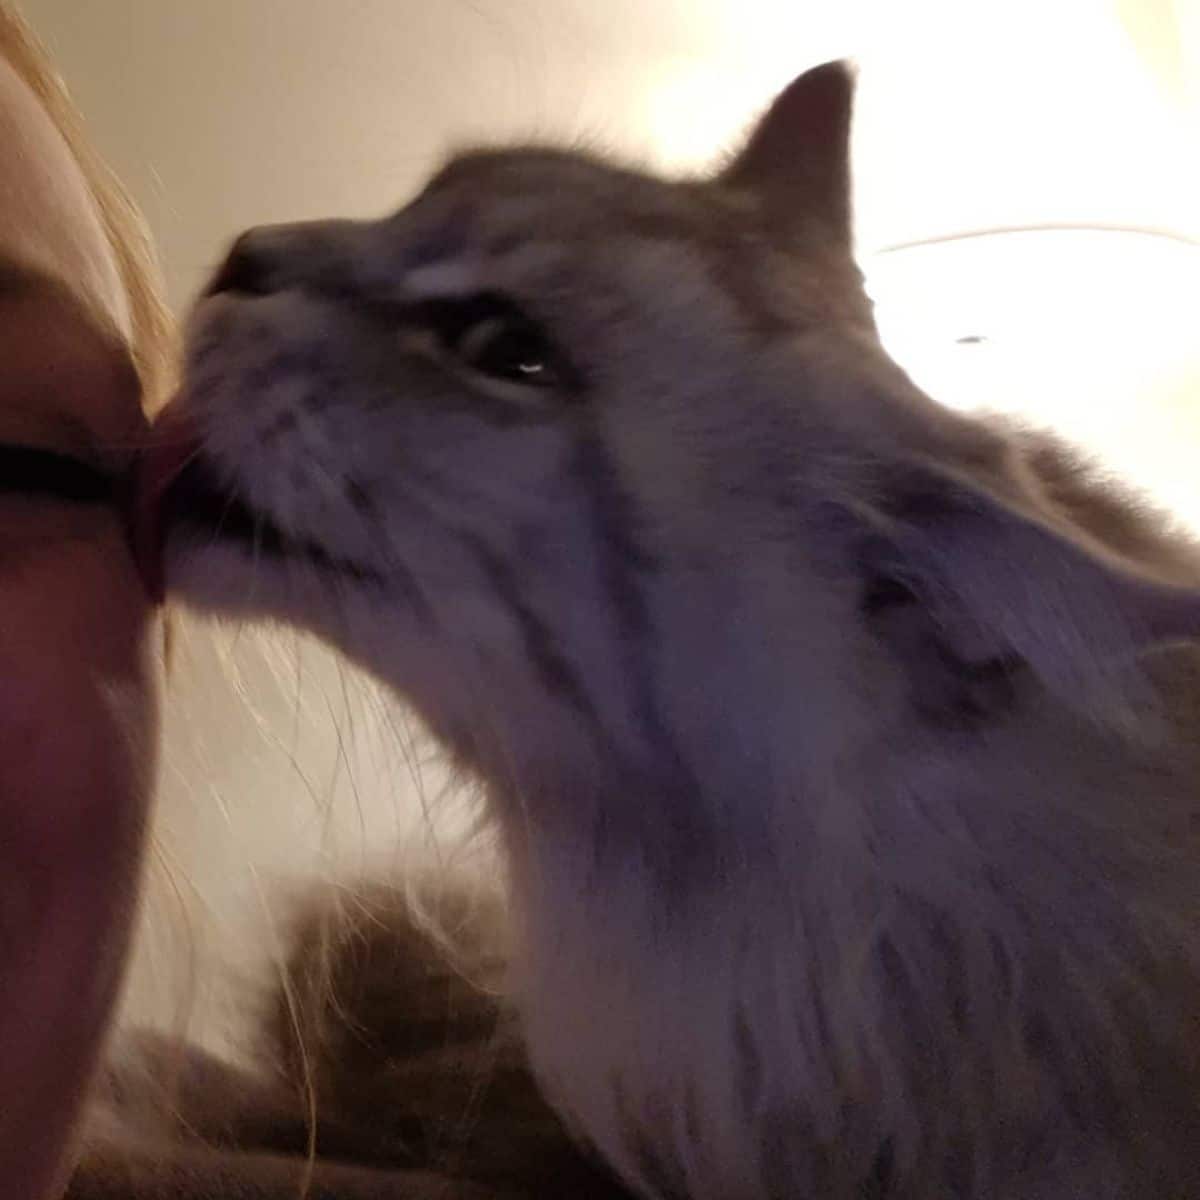 A silver maine coon licking its owner face.